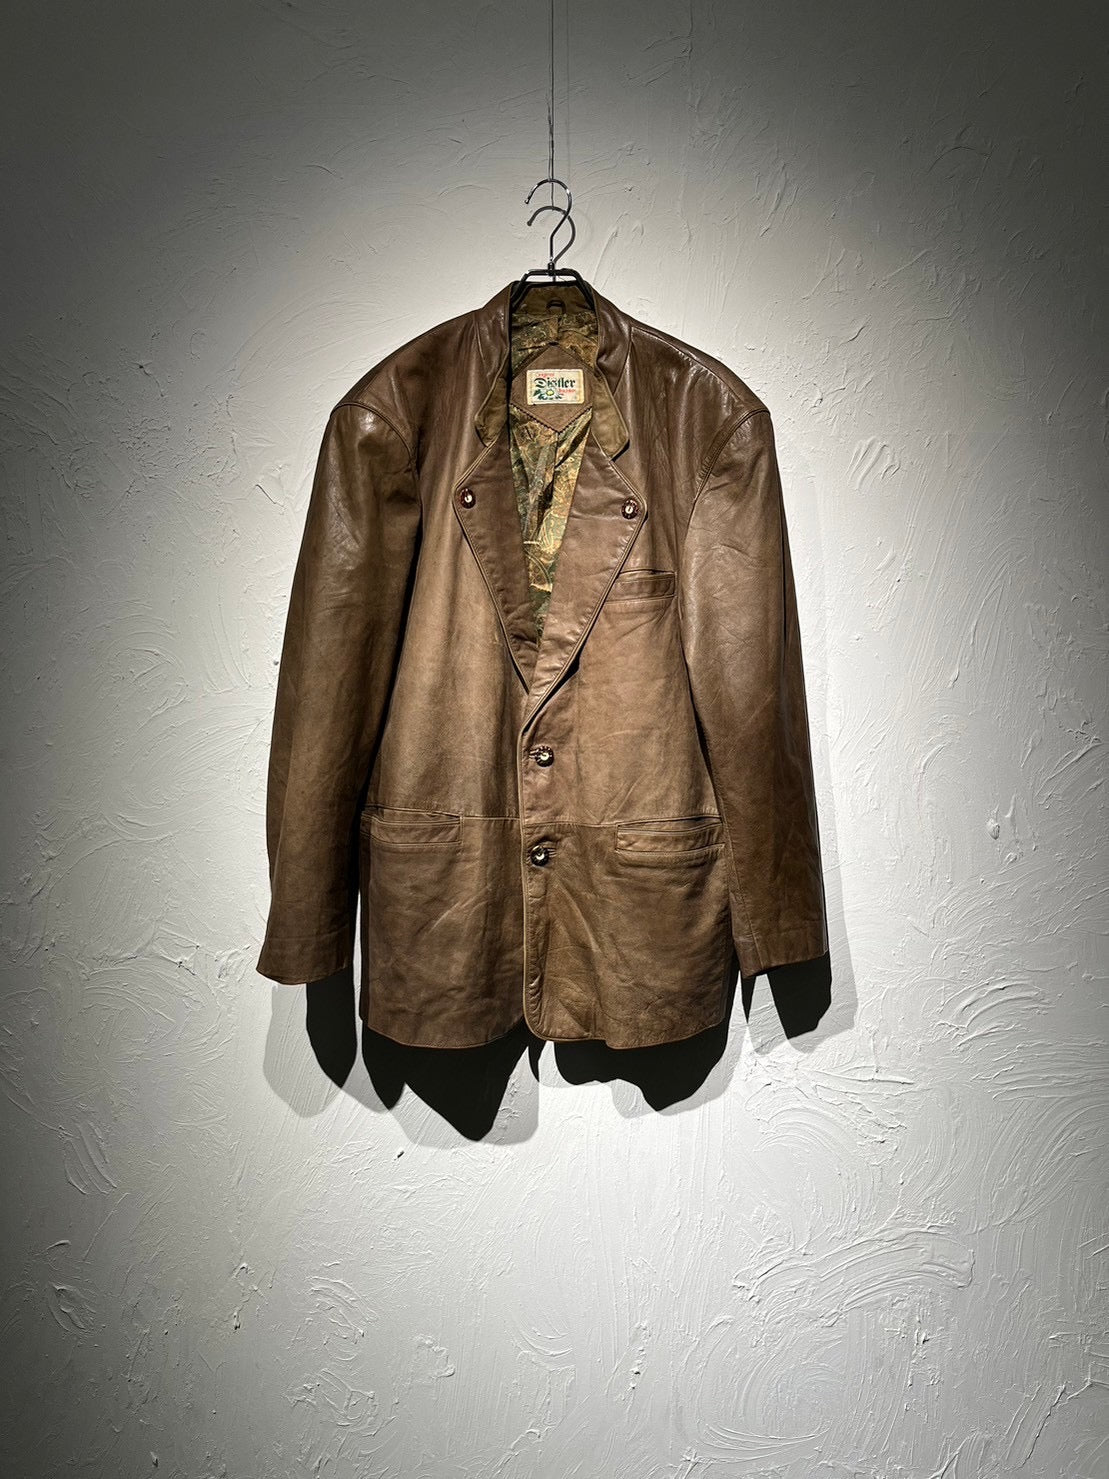 tyrolean leather jacket